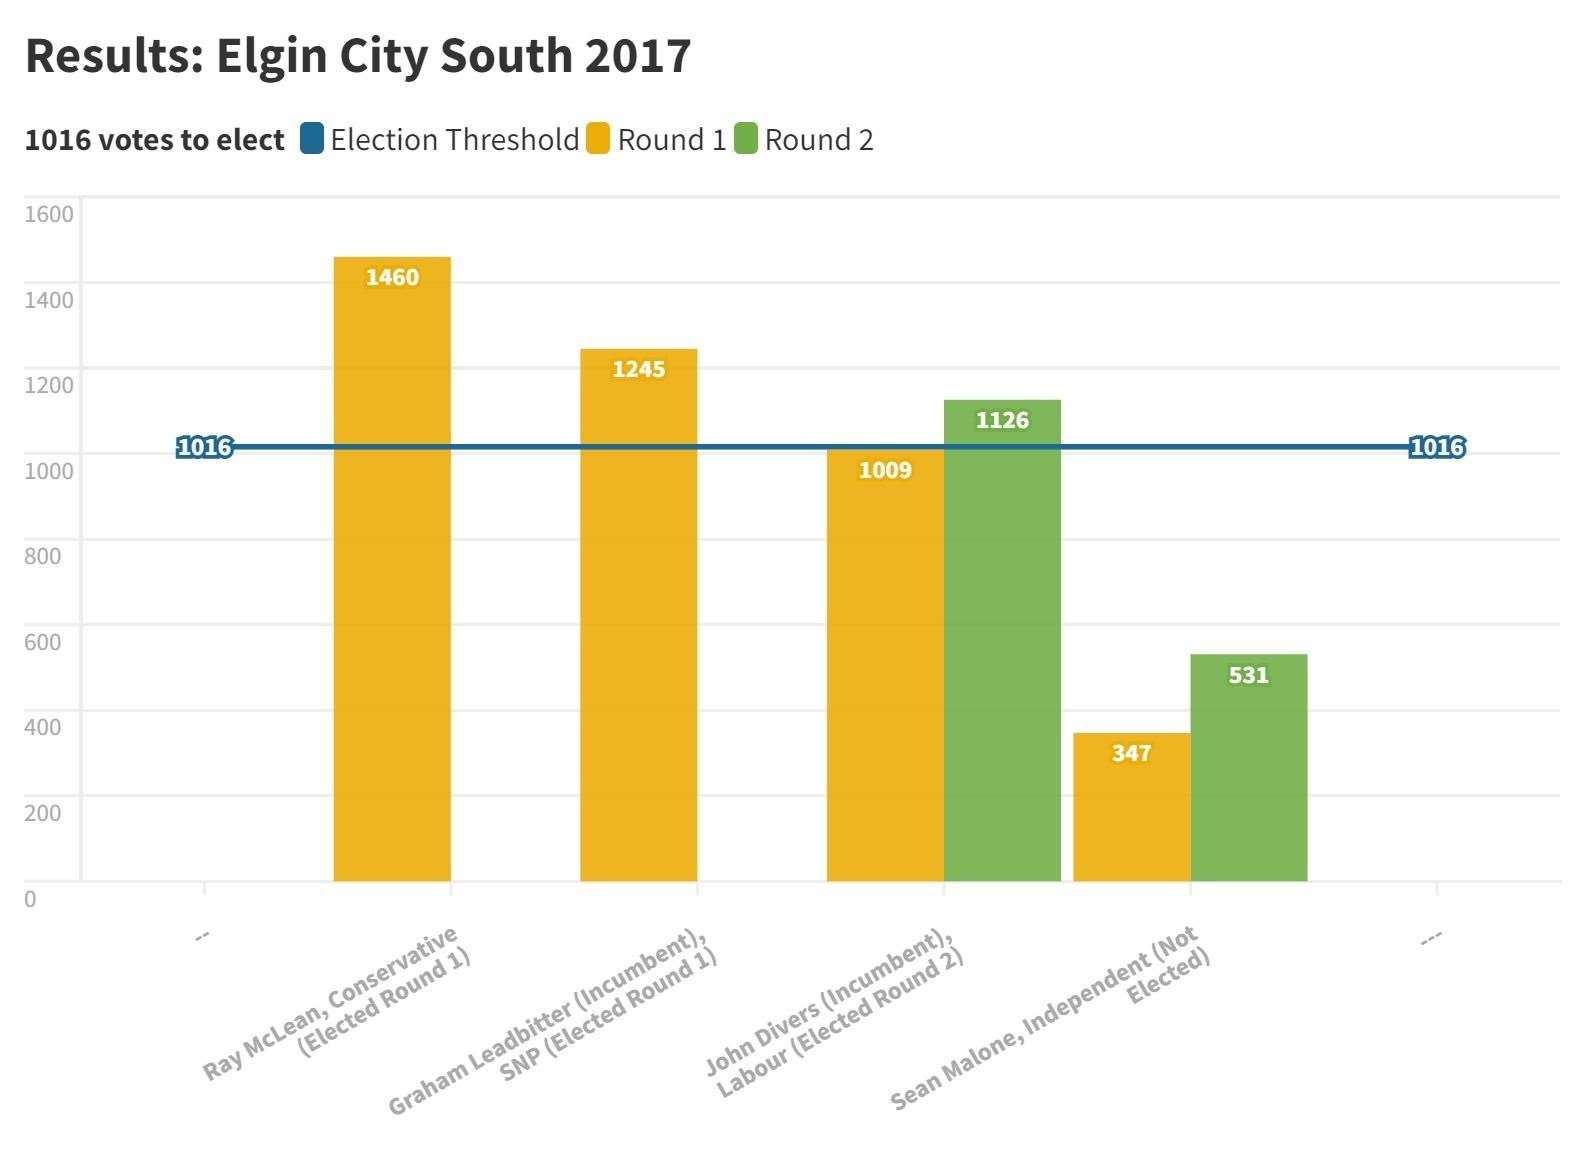 The results from Elgin City South in 2017.